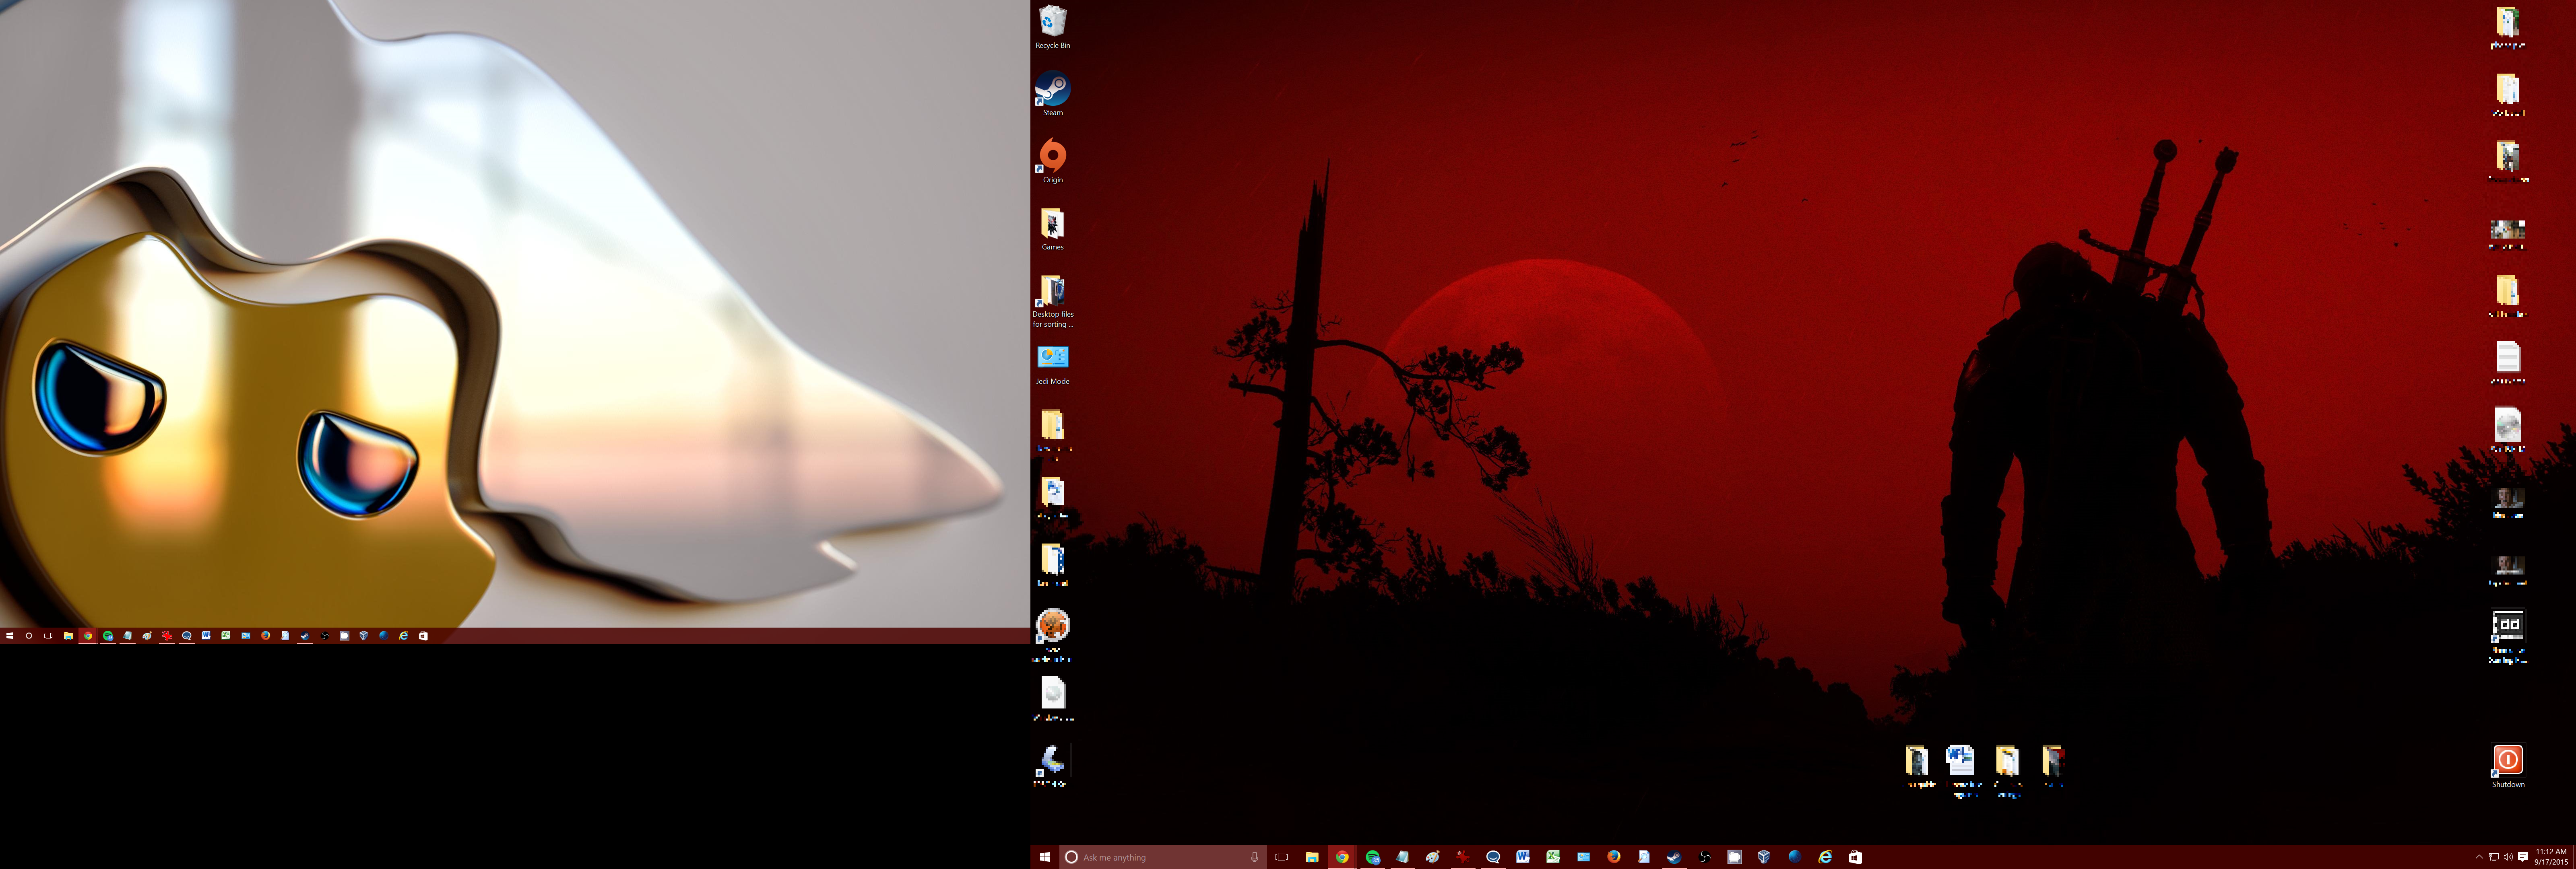 Dual Monitor Different Wallpapers Windows 7 Group 27